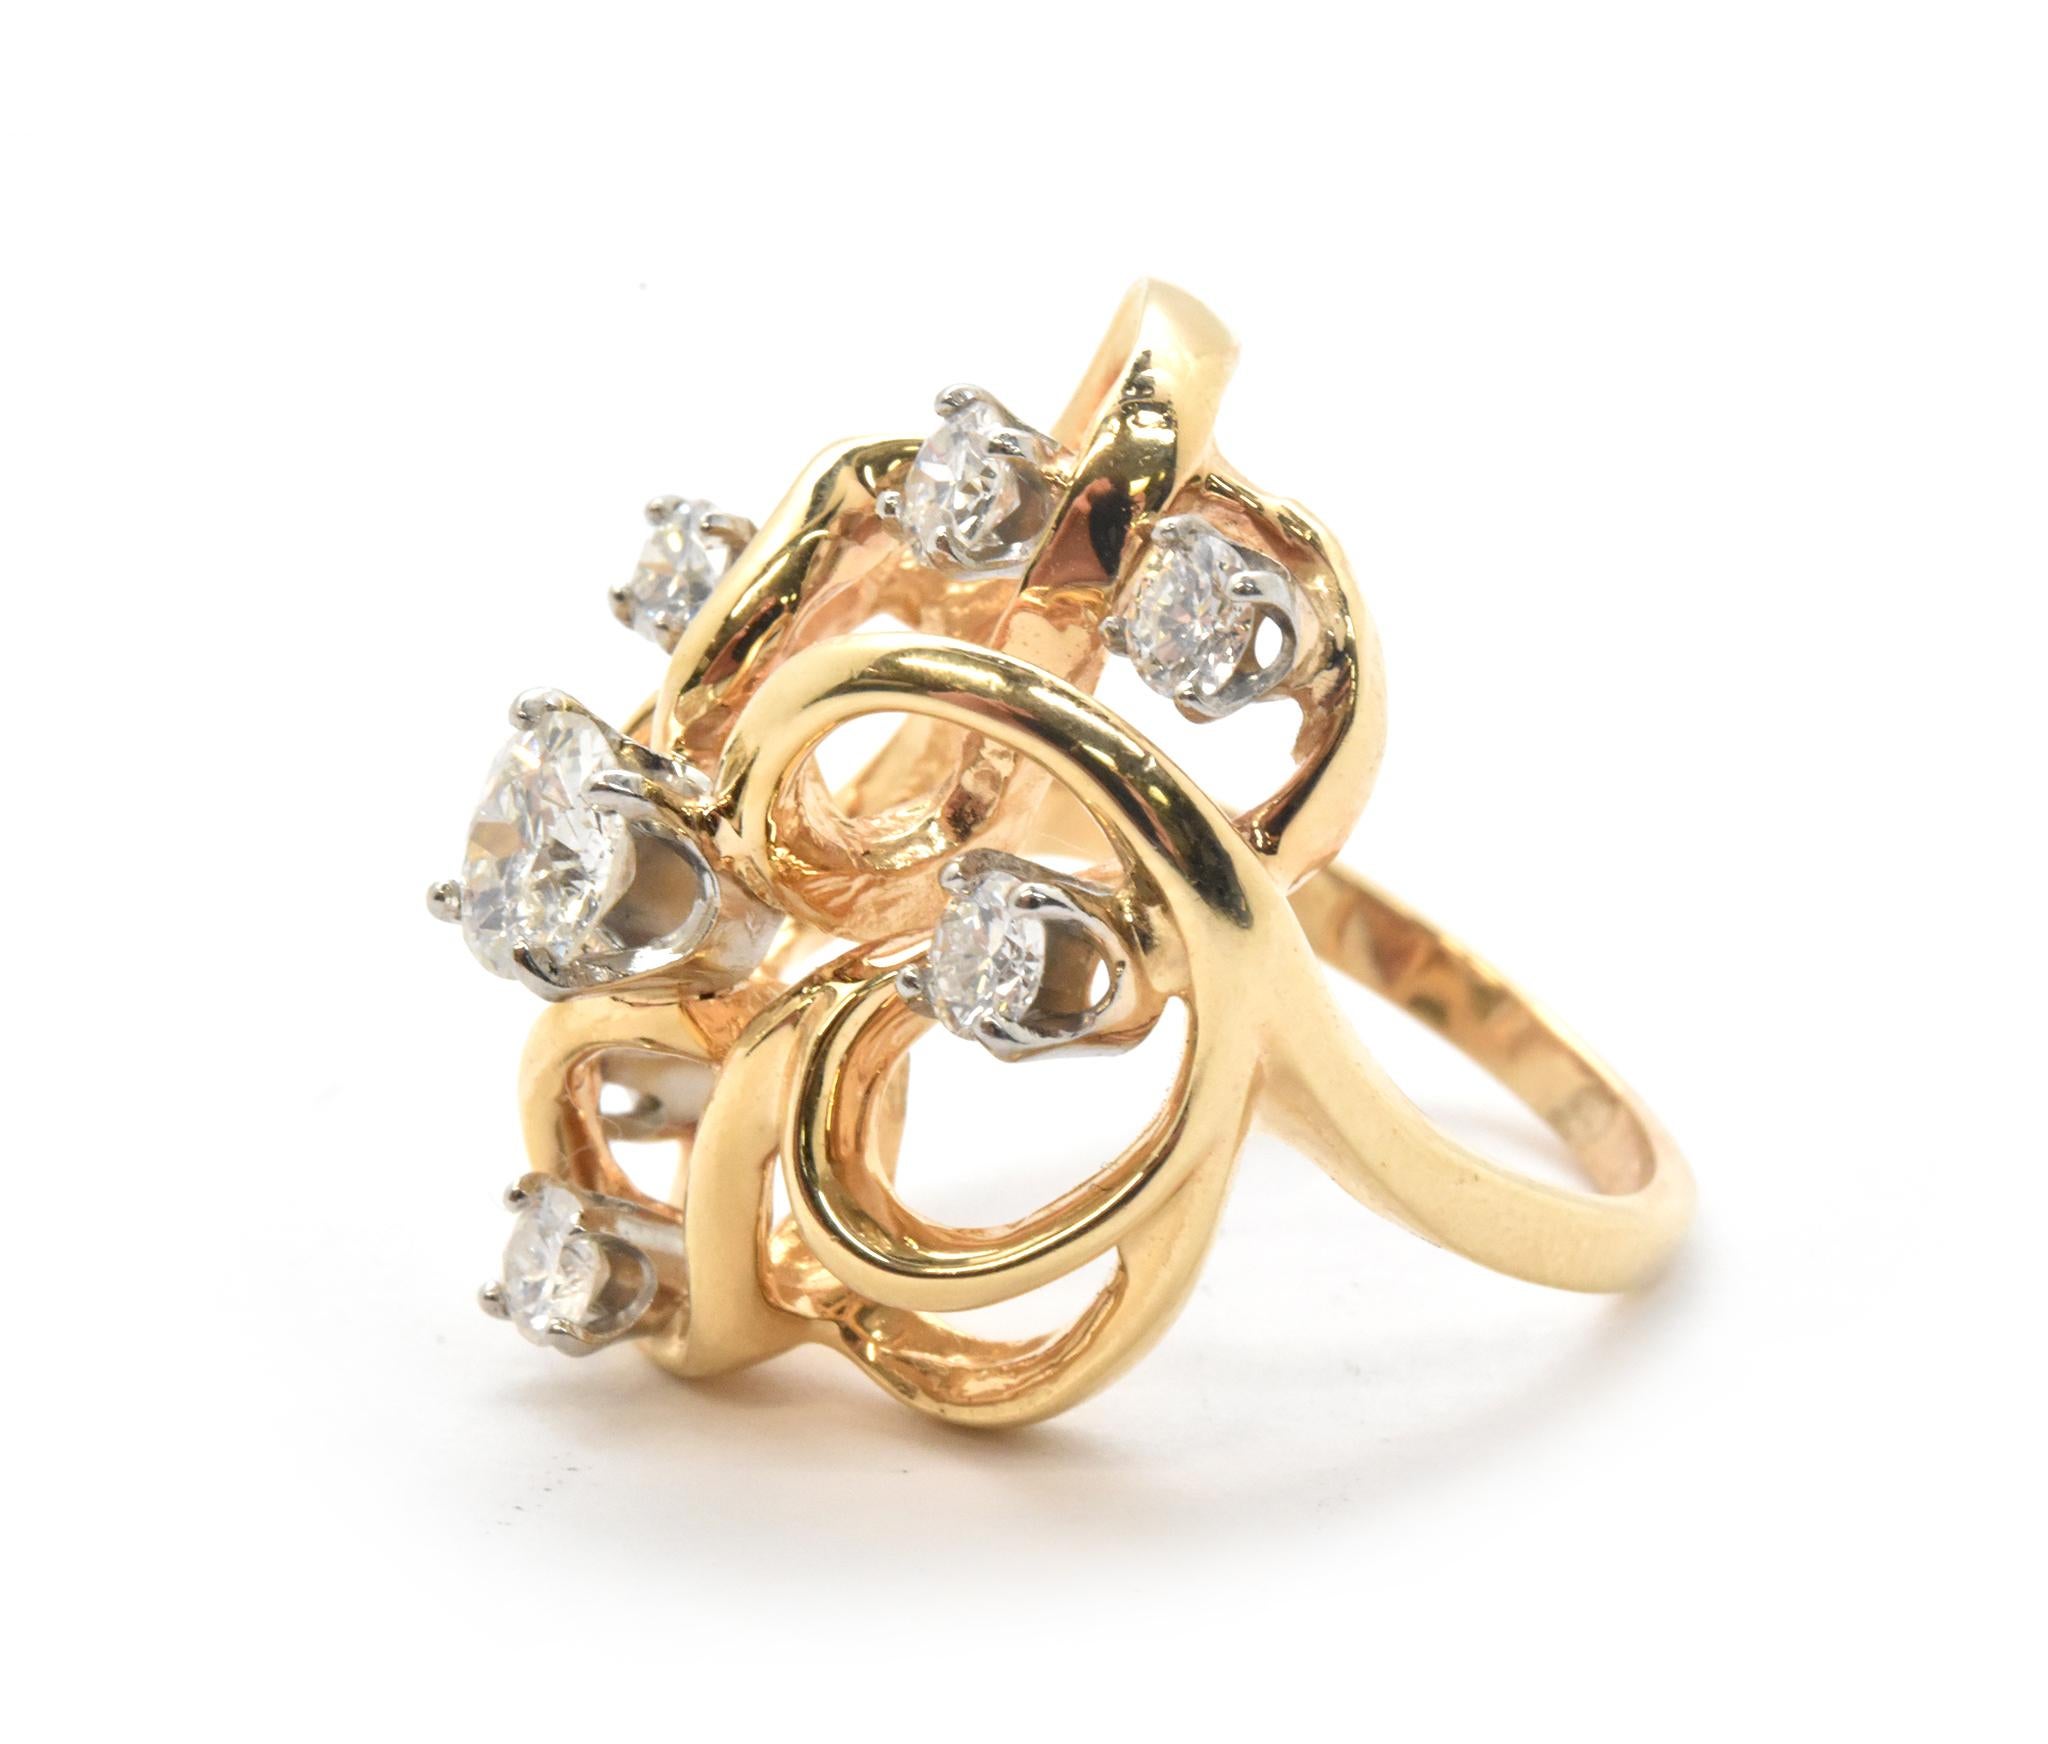 This beautiful ring is designed in 14k yellow gold, and it holds 7 round brilliant-cut diamonds for a total weight of 1.10 carats. The diamonds are graded I-J in color and SI in clarity. This cocktail ring measures 23mm wide, and it weighs 8.85